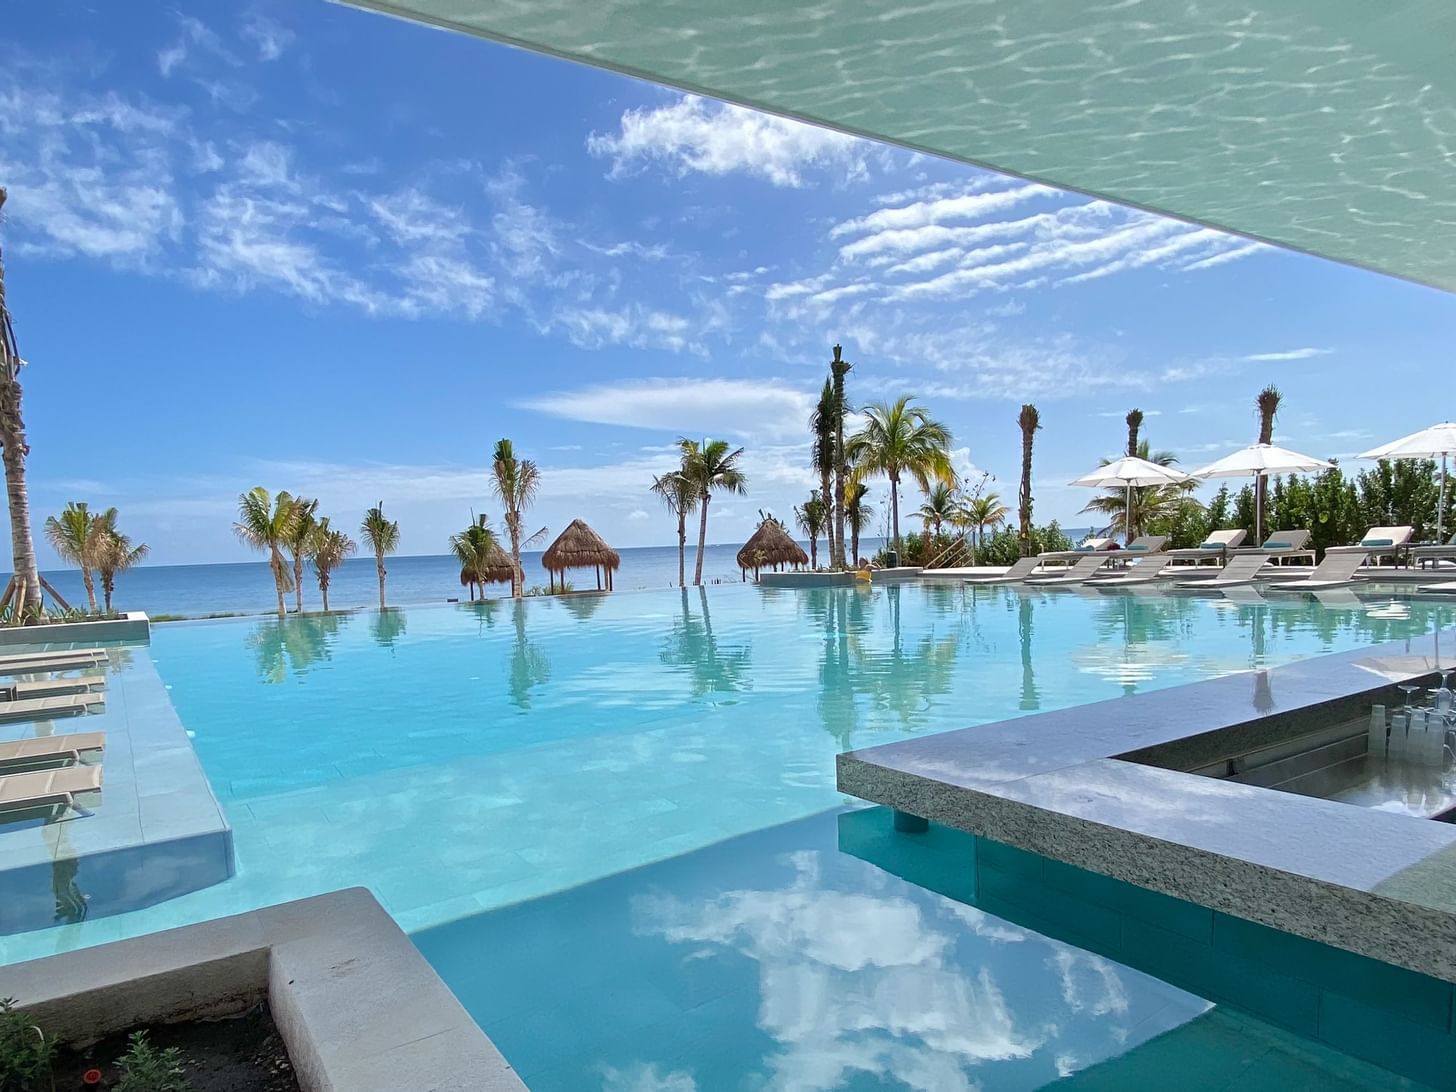 Preferred Club very private serenity pool overlooks the ocean as